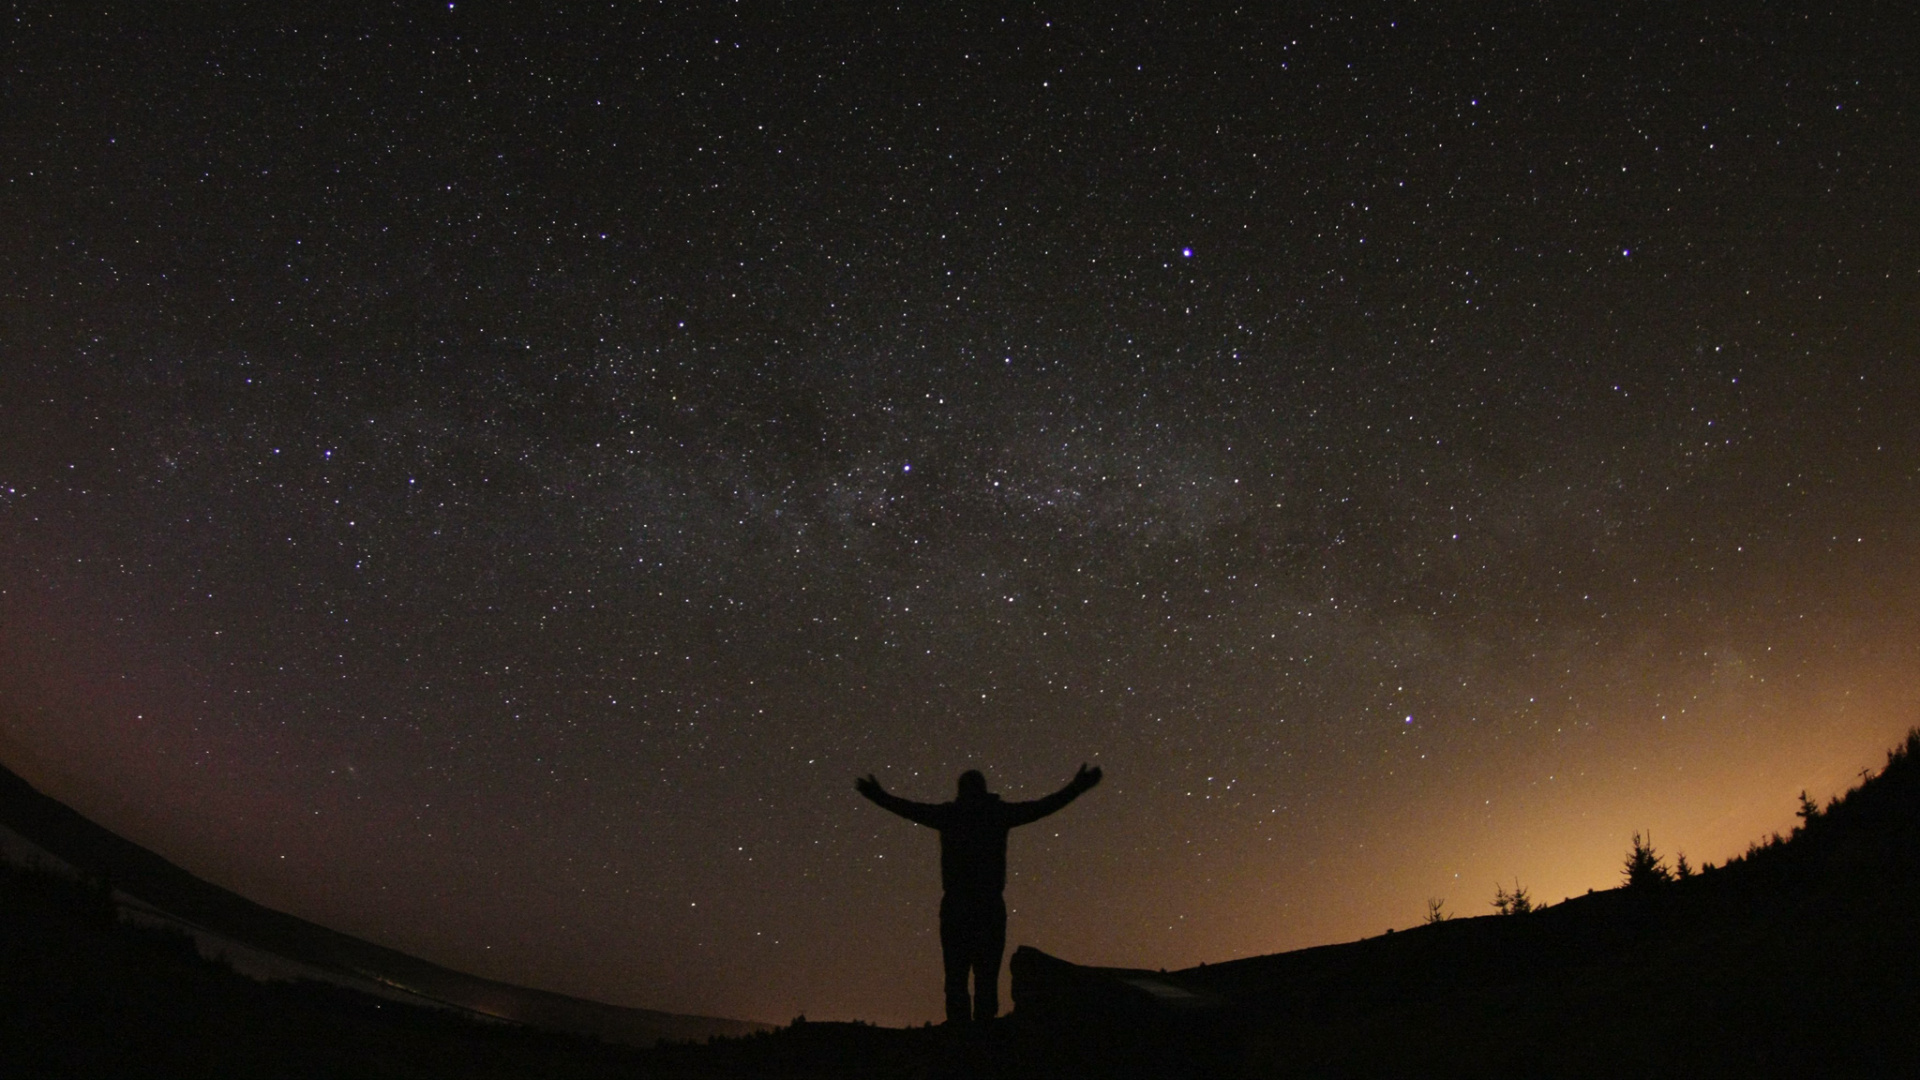 Silhouette of Person Standing on Hill Under Starry Night. Wallpaper in 1920x1080 Resolution